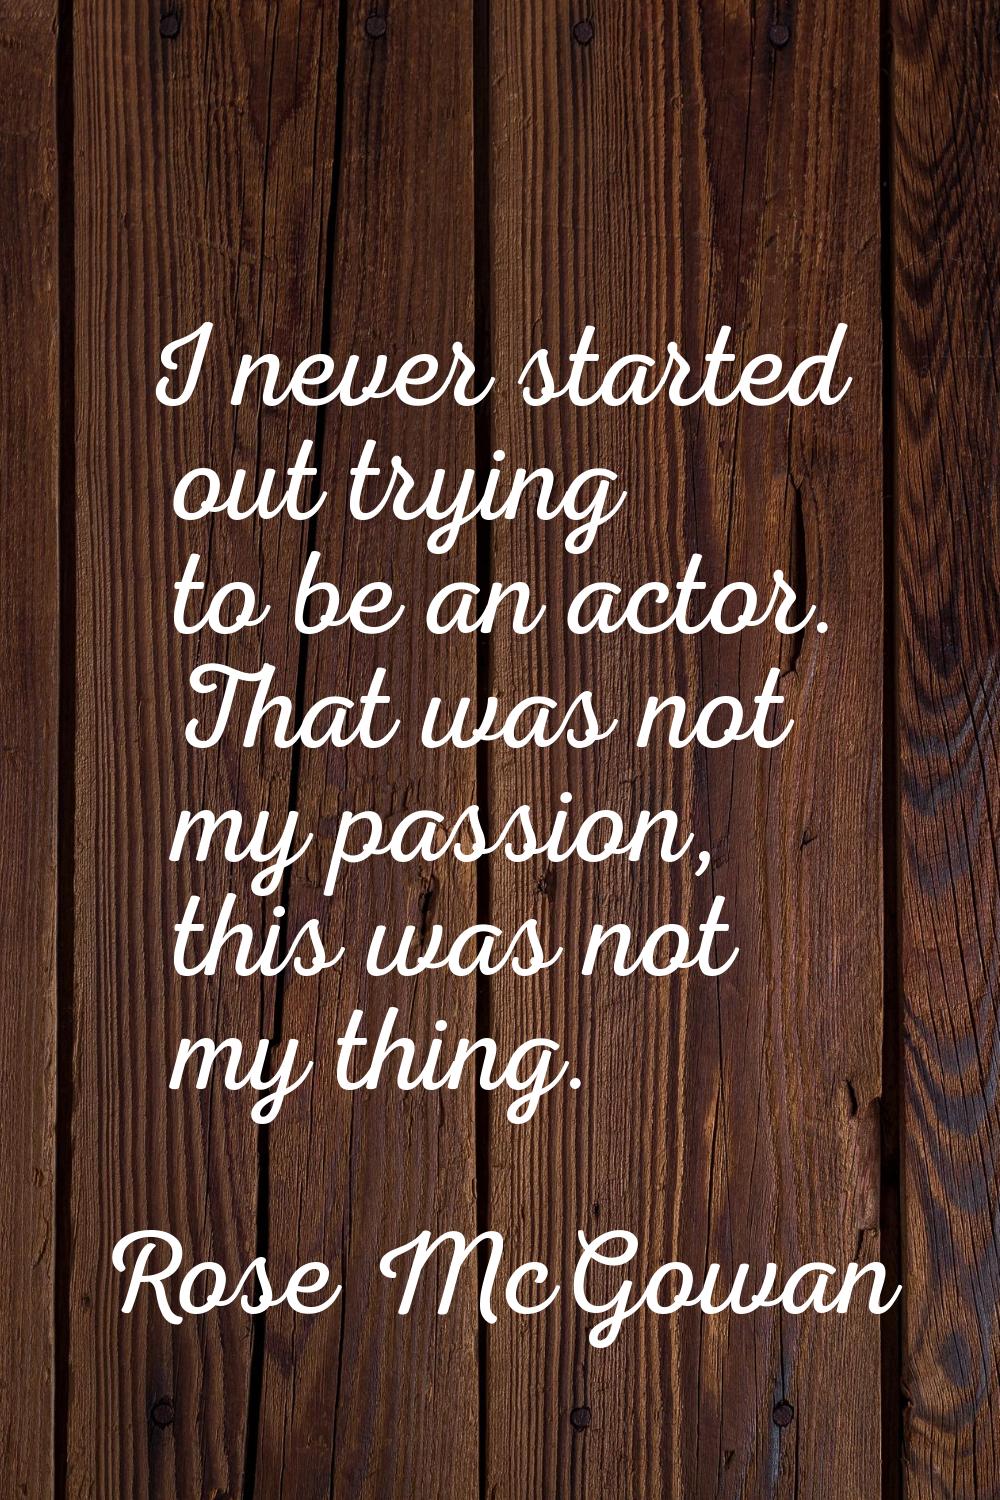 I never started out trying to be an actor. That was not my passion, this was not my thing.